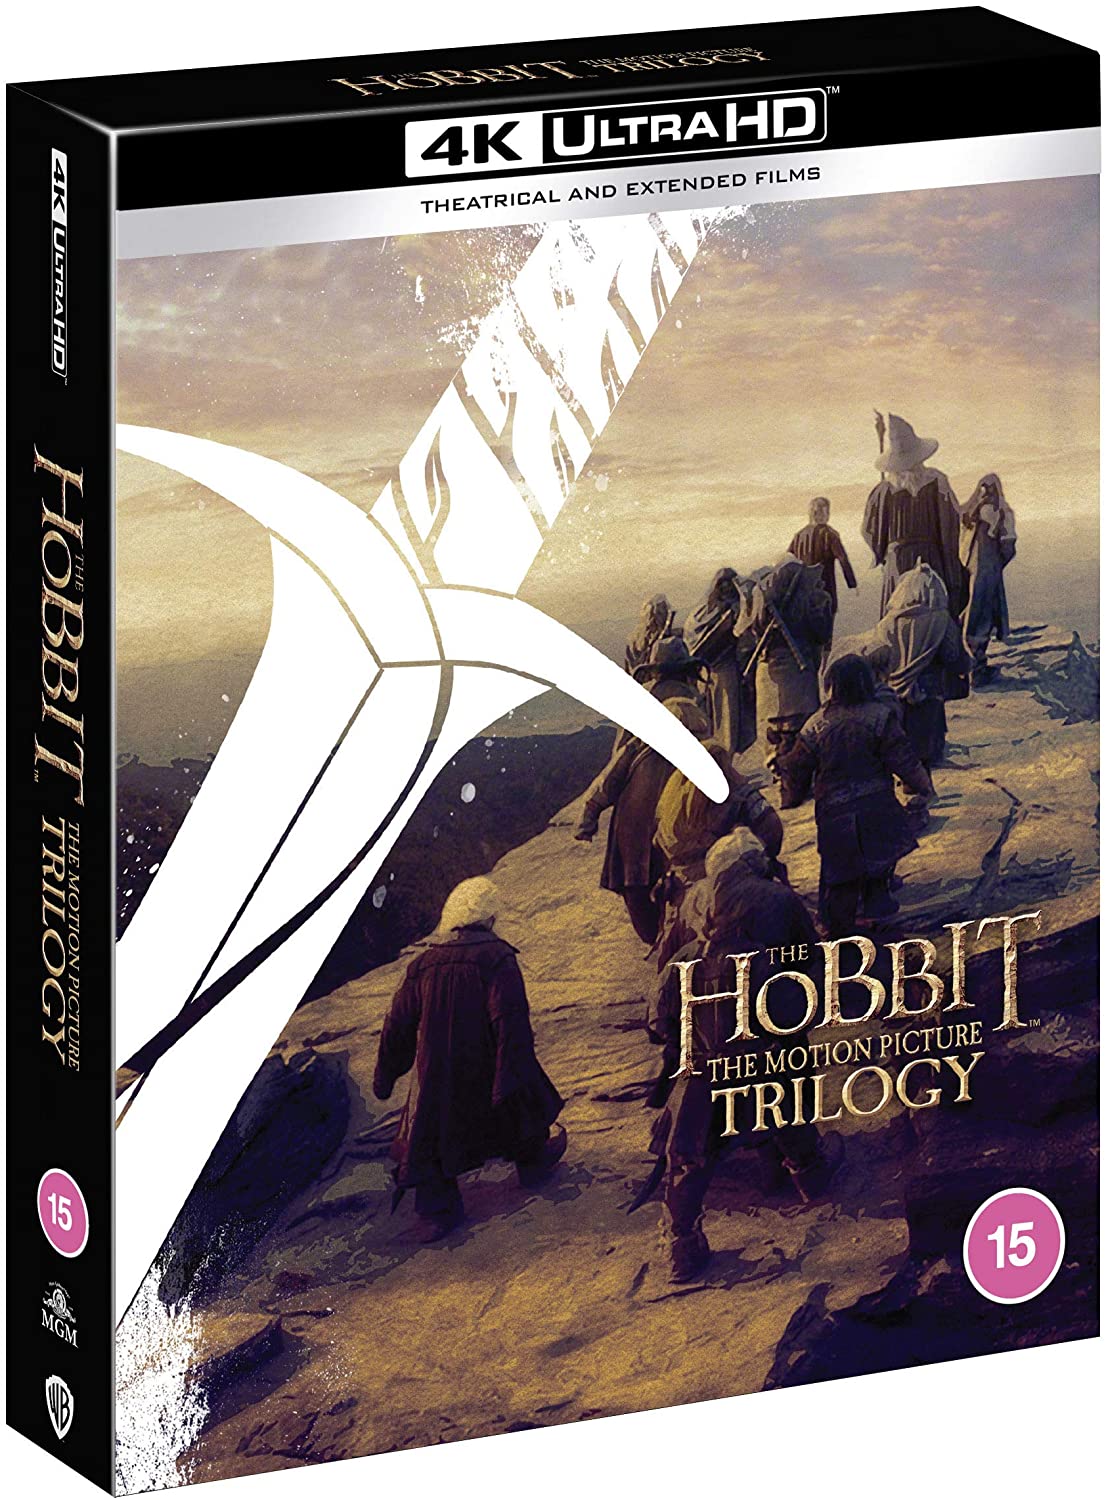 The Hobbit Trilogy [Theatrical and Extended Edition] [2012] (4K Ultra HD)